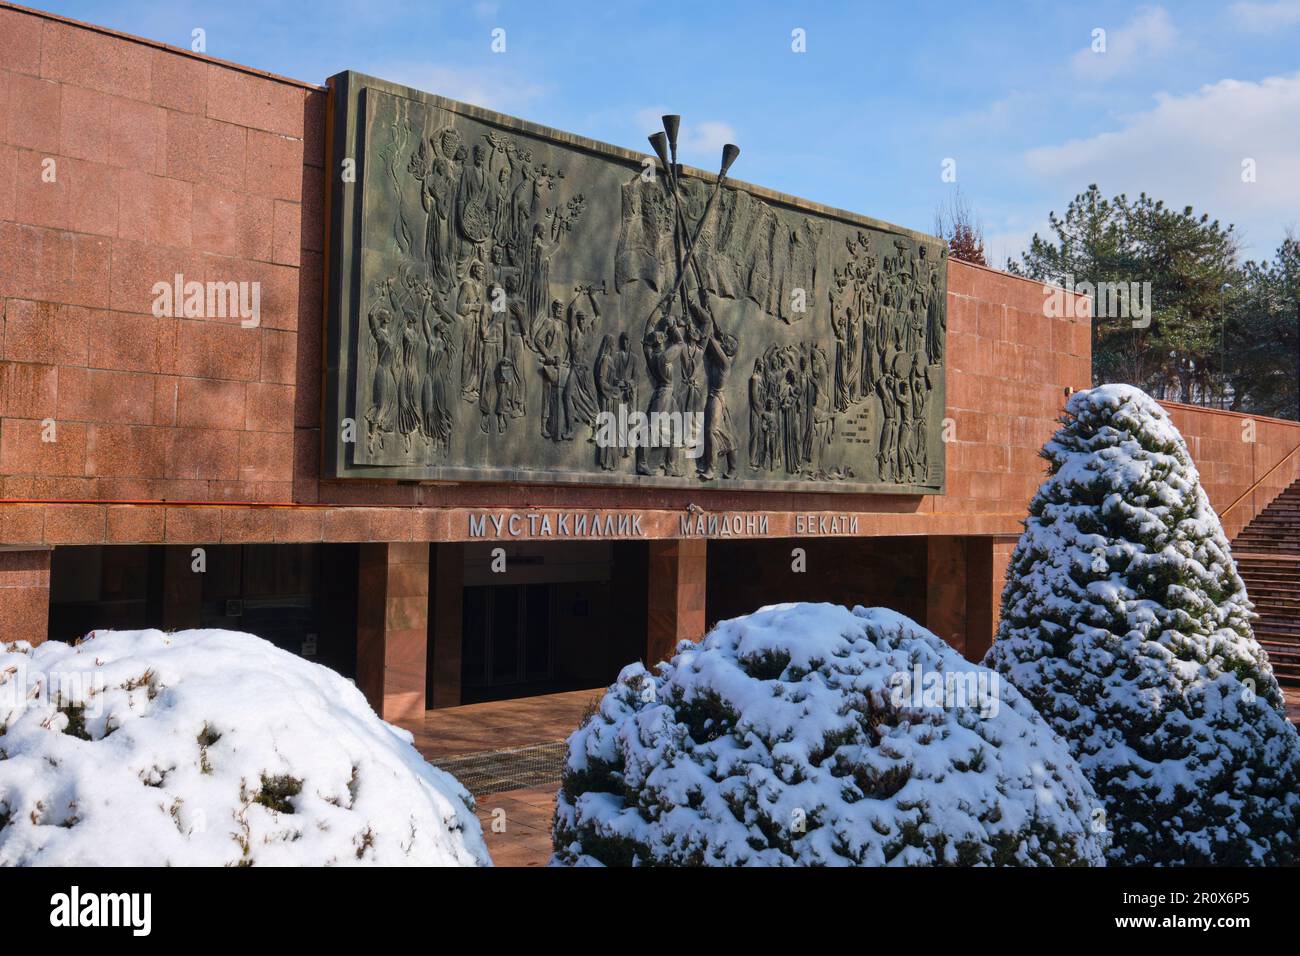 View of the big bronze frieze hanging outside the station entrance for the metro stop at Mustakillik Maydoni. Right after a winter storm left a light Stock Photo